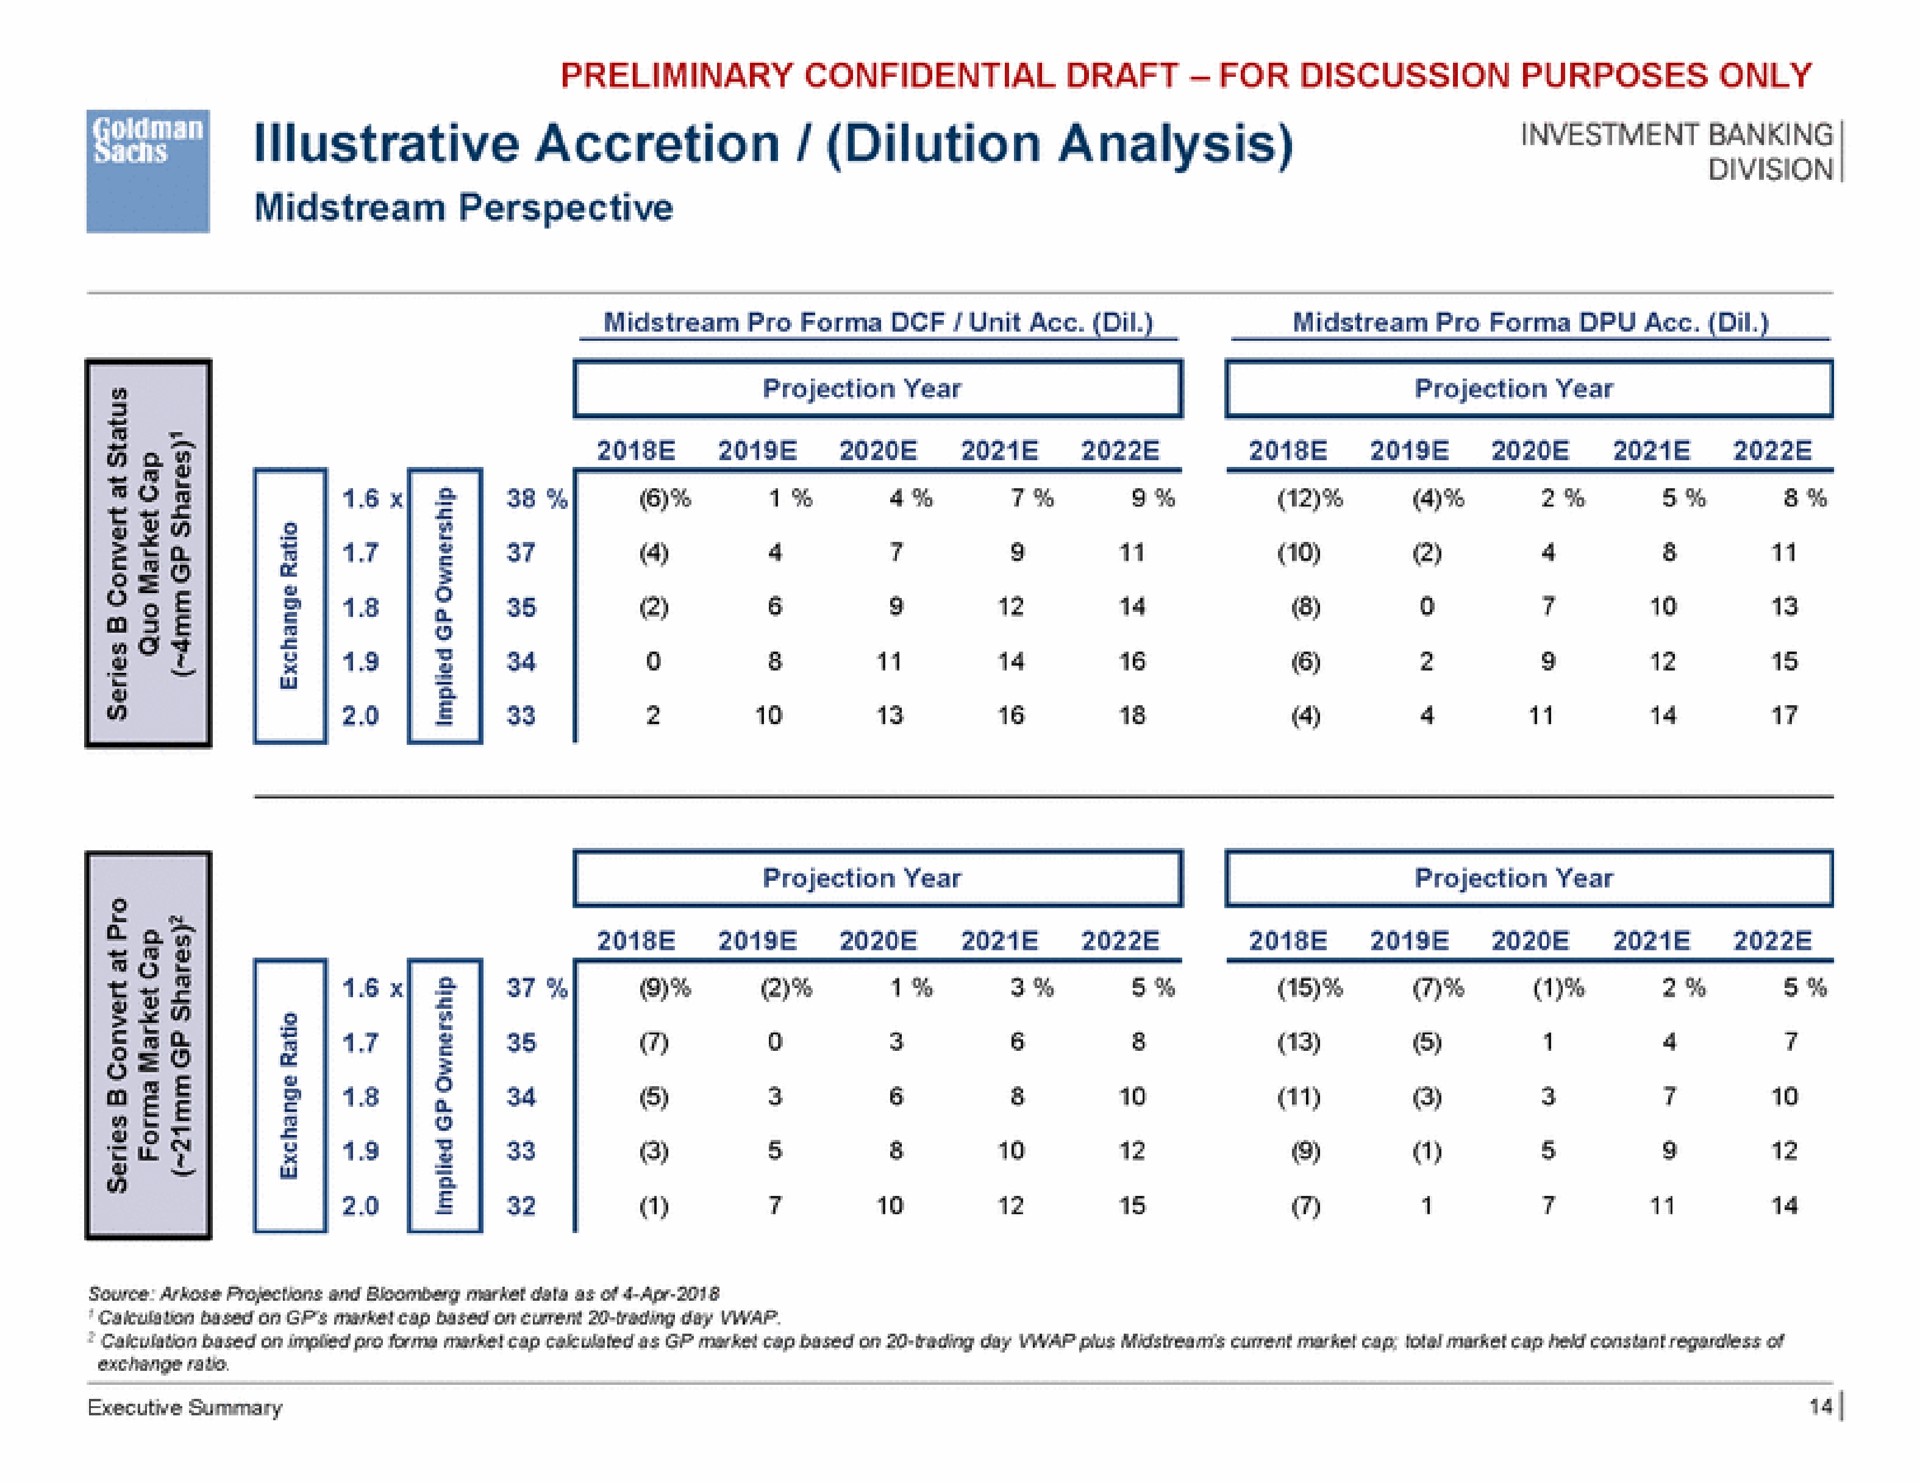 a illustrative accretion dilution analysis eer be midstream perspective | Goldman Sachs